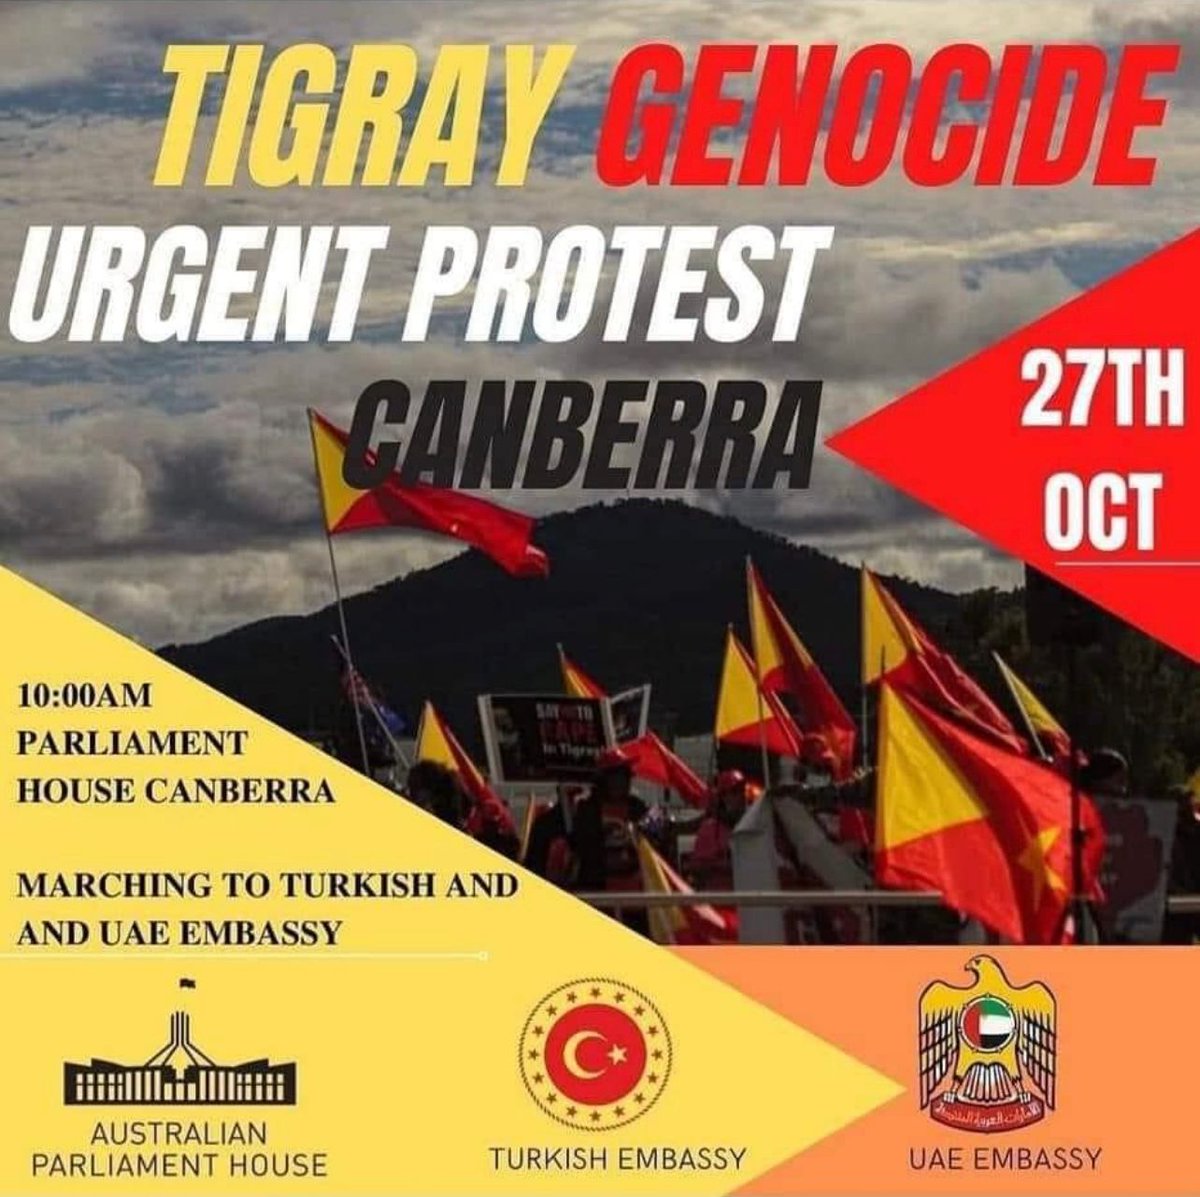 #Canberra #Australia 
Stand Up For #Tigray **Thursday!**

Please Come Down And Join Us At Our Peaceful Demonstration.

Be A #VoiceForTheVoiceless 📢

Please SHARE📢

#HumanitarianCrisis #TigrayGenocide 
@AlboMP @AusForeign @SkyNews @SBS @7NewsMelbourne @10NewsFirstSyd